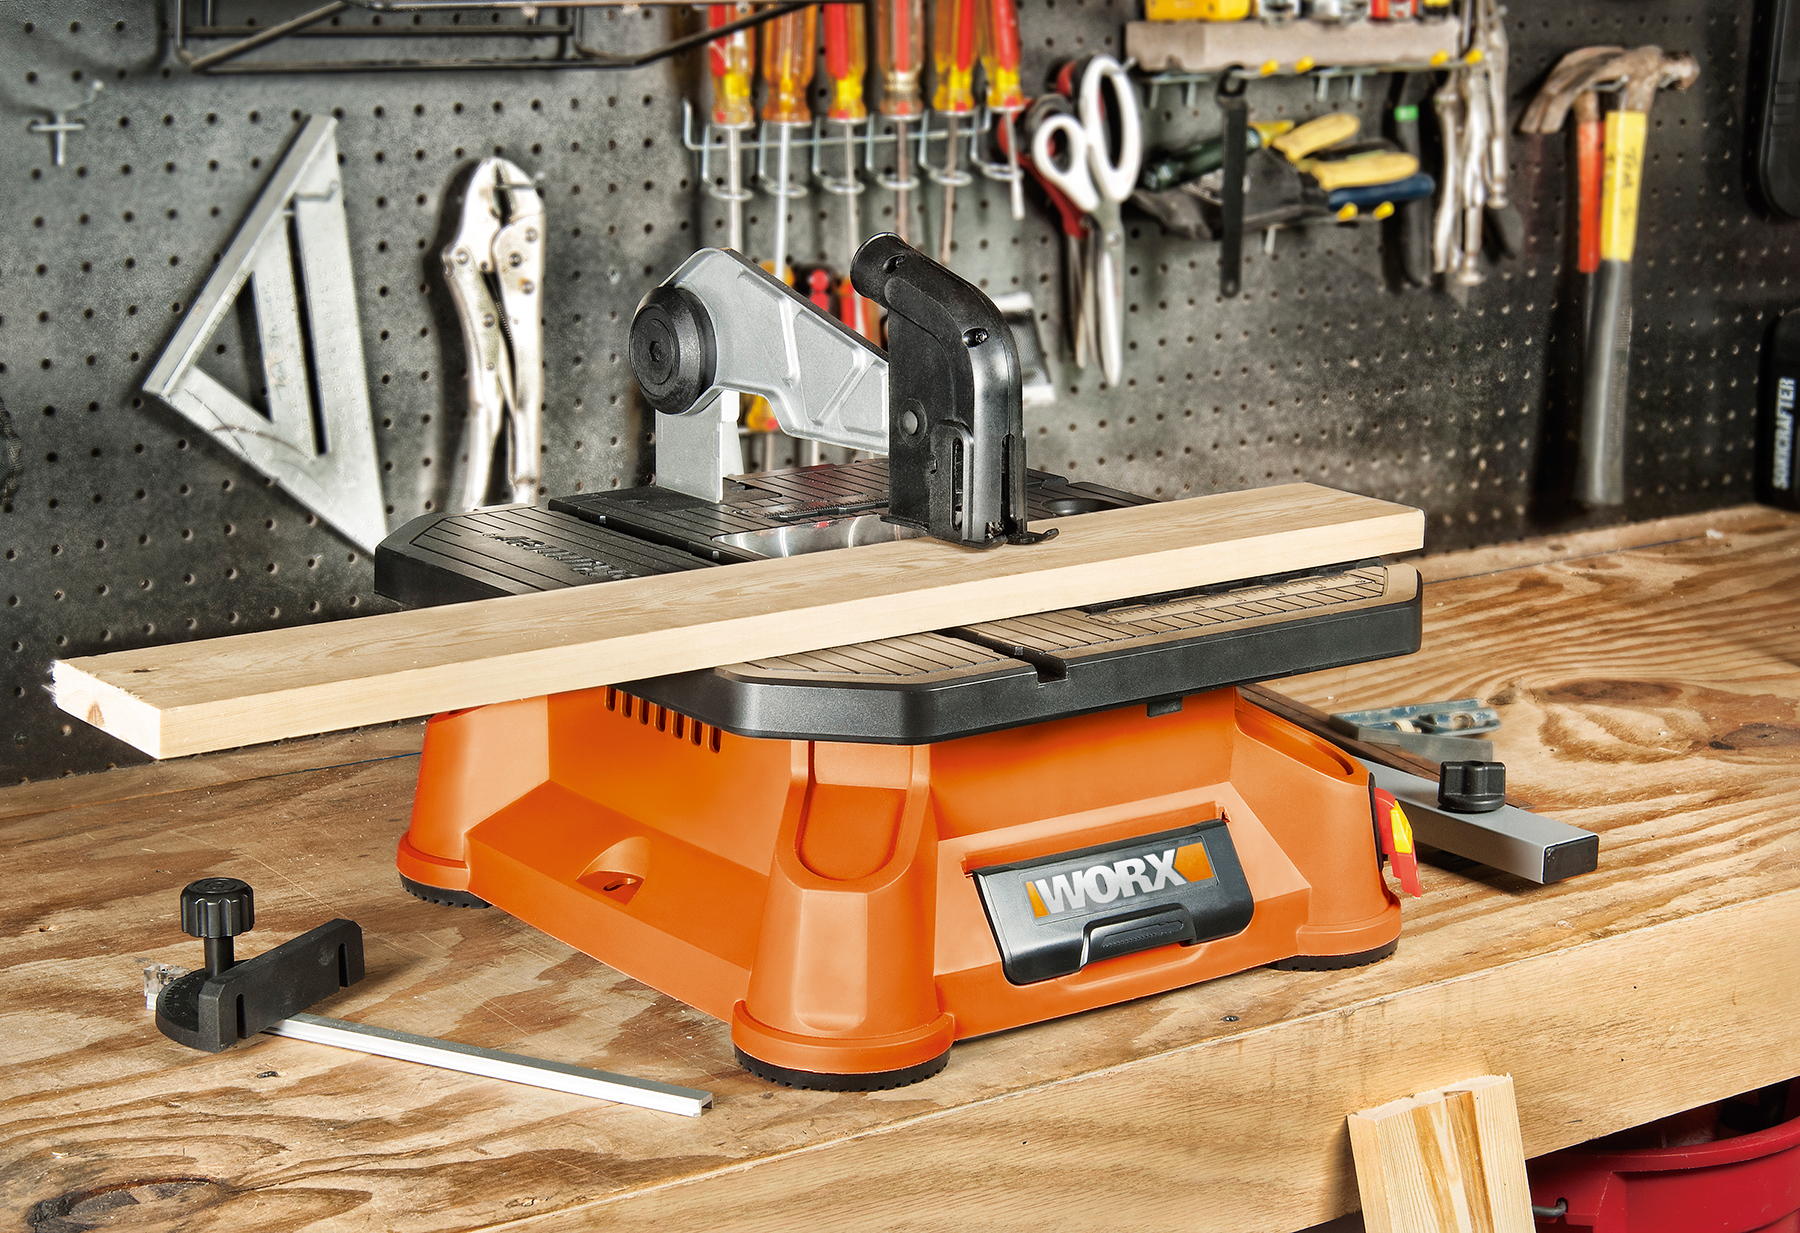 The WORX BladeRunner is ideal for a wide range of woodworking and home improvement projects.